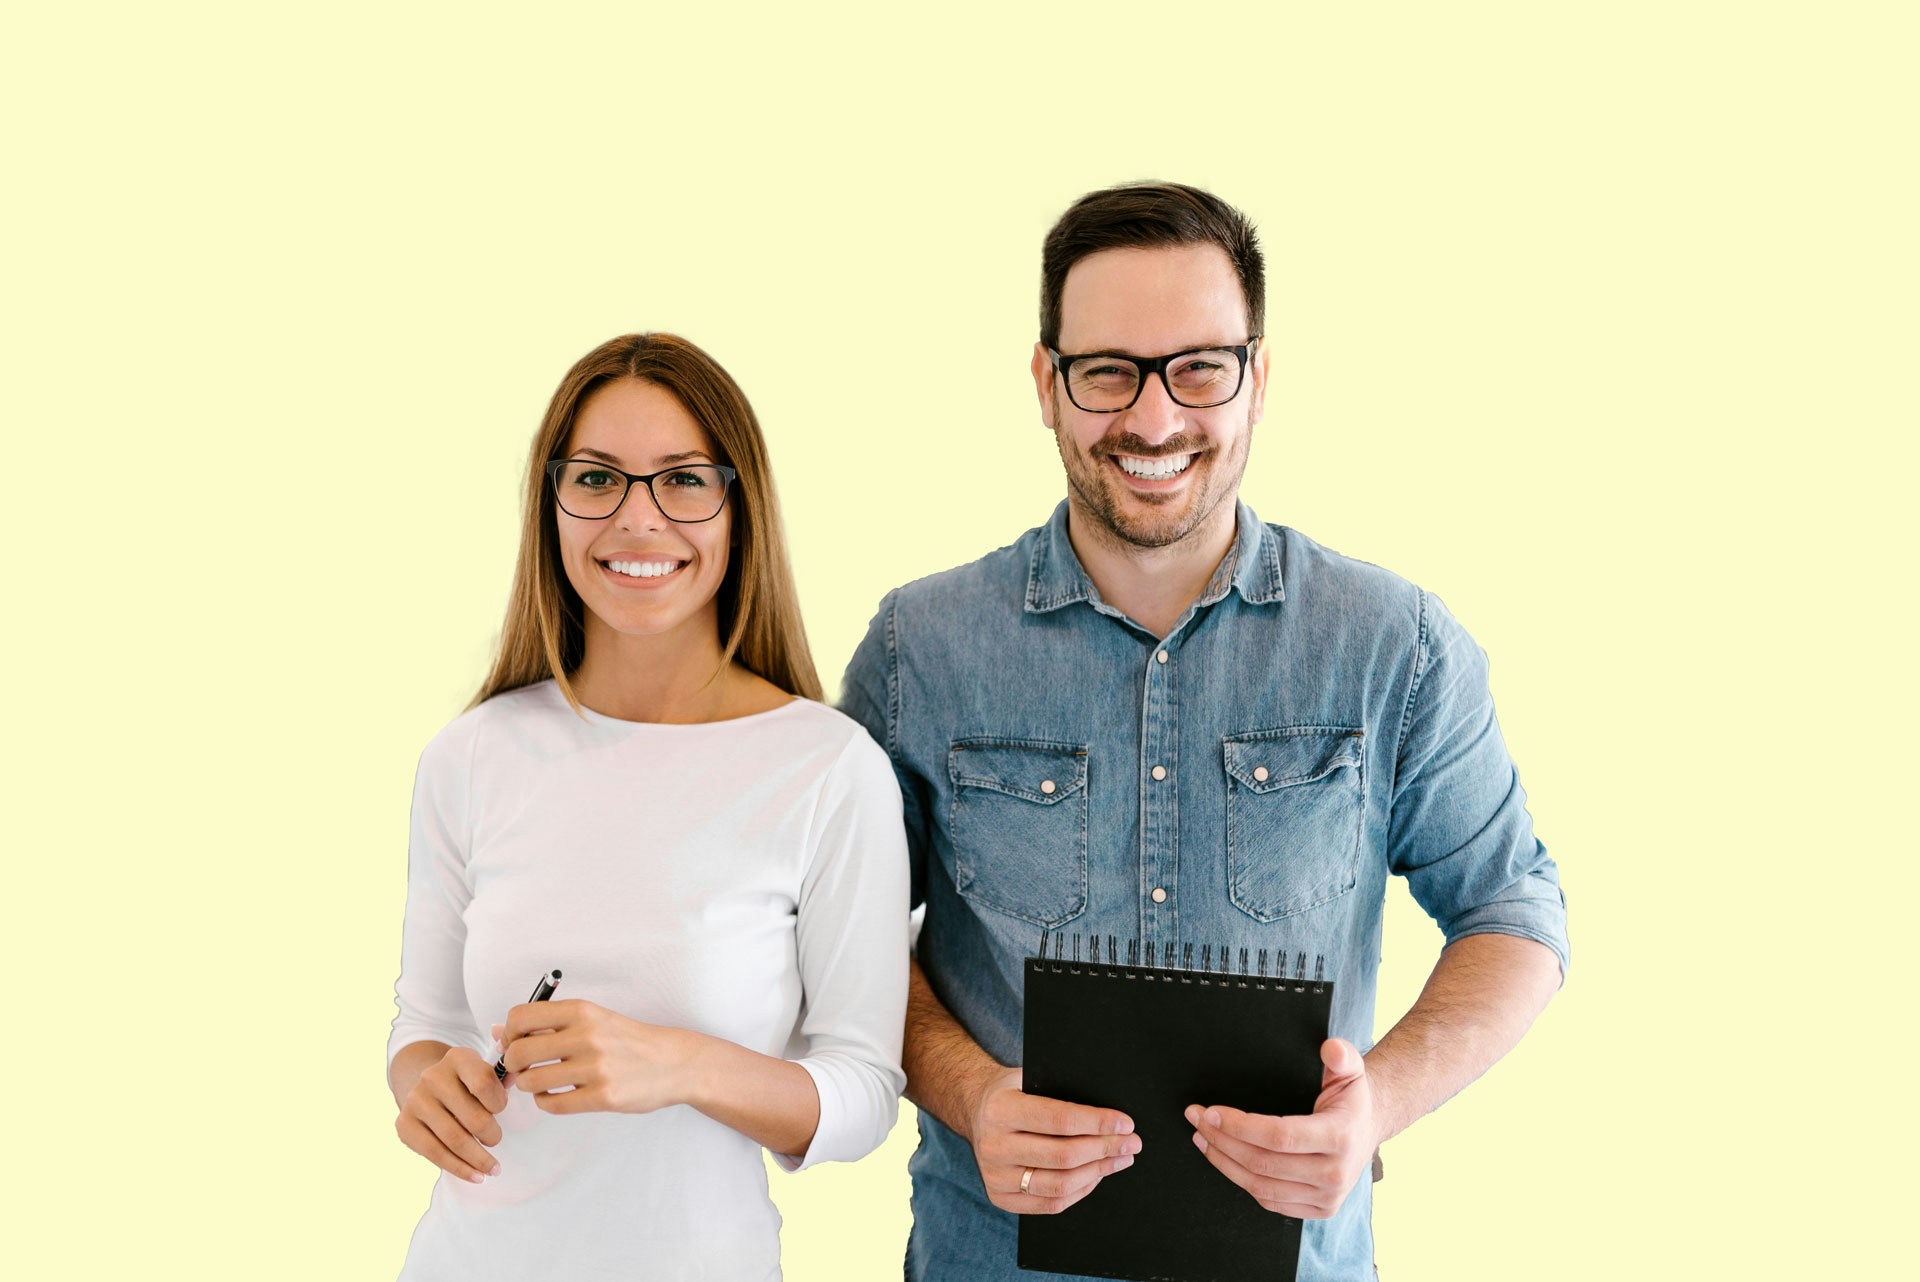 Two people standing in front of a light yellow background